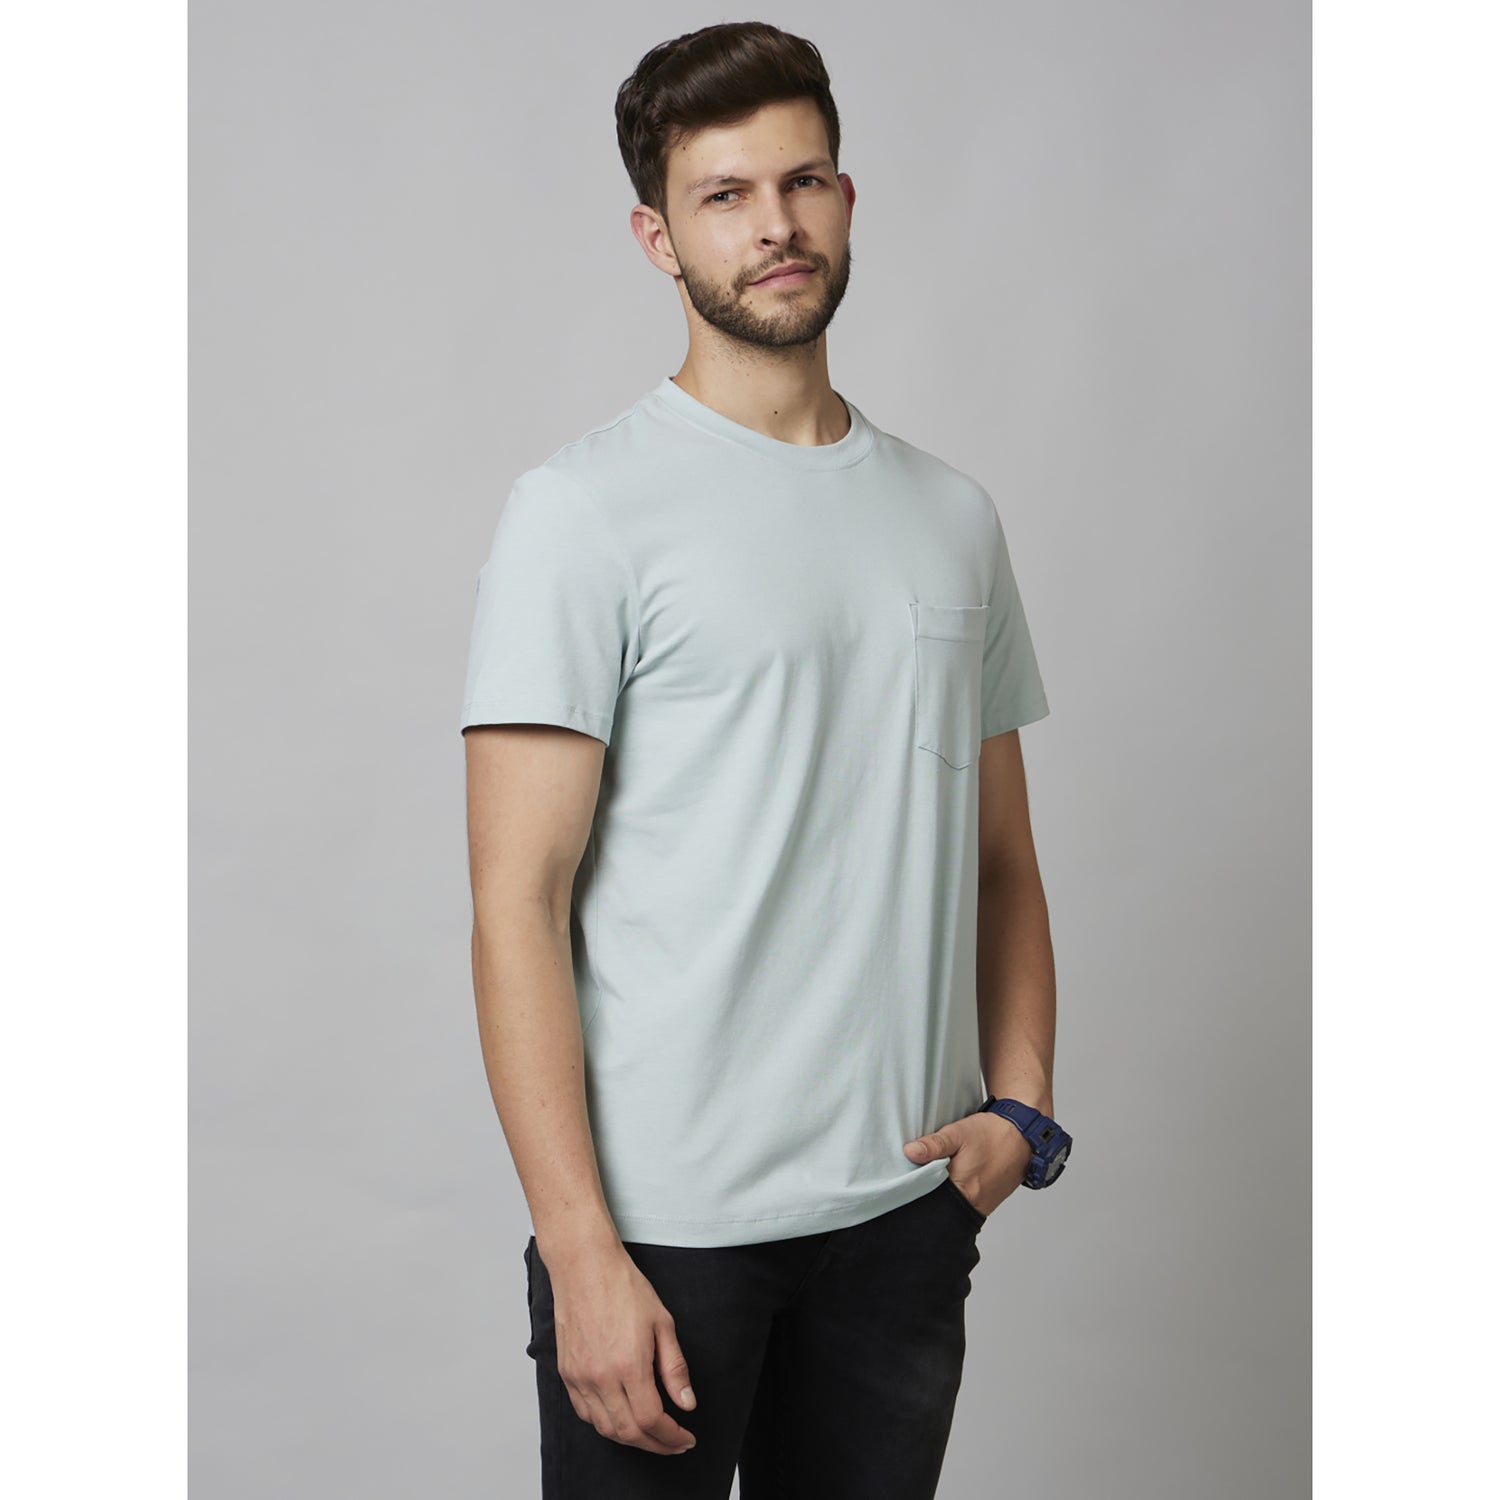 Blue Solid Short Sleeve Cotton Poly Blend T-Shirts (DECOMFORT)